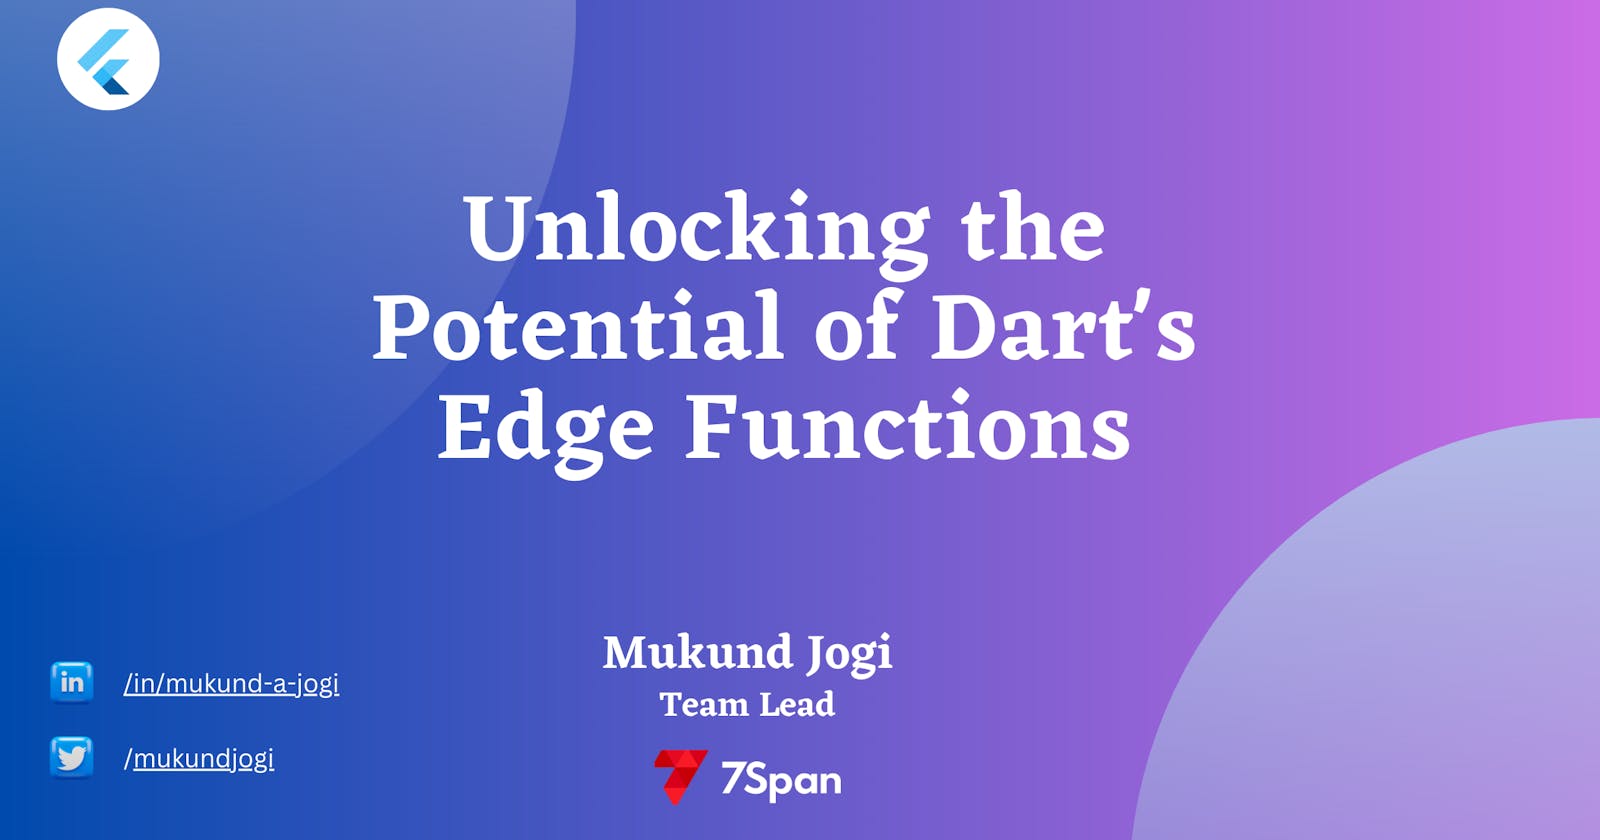 Unlocking the Potential of Dart's Edge Functions